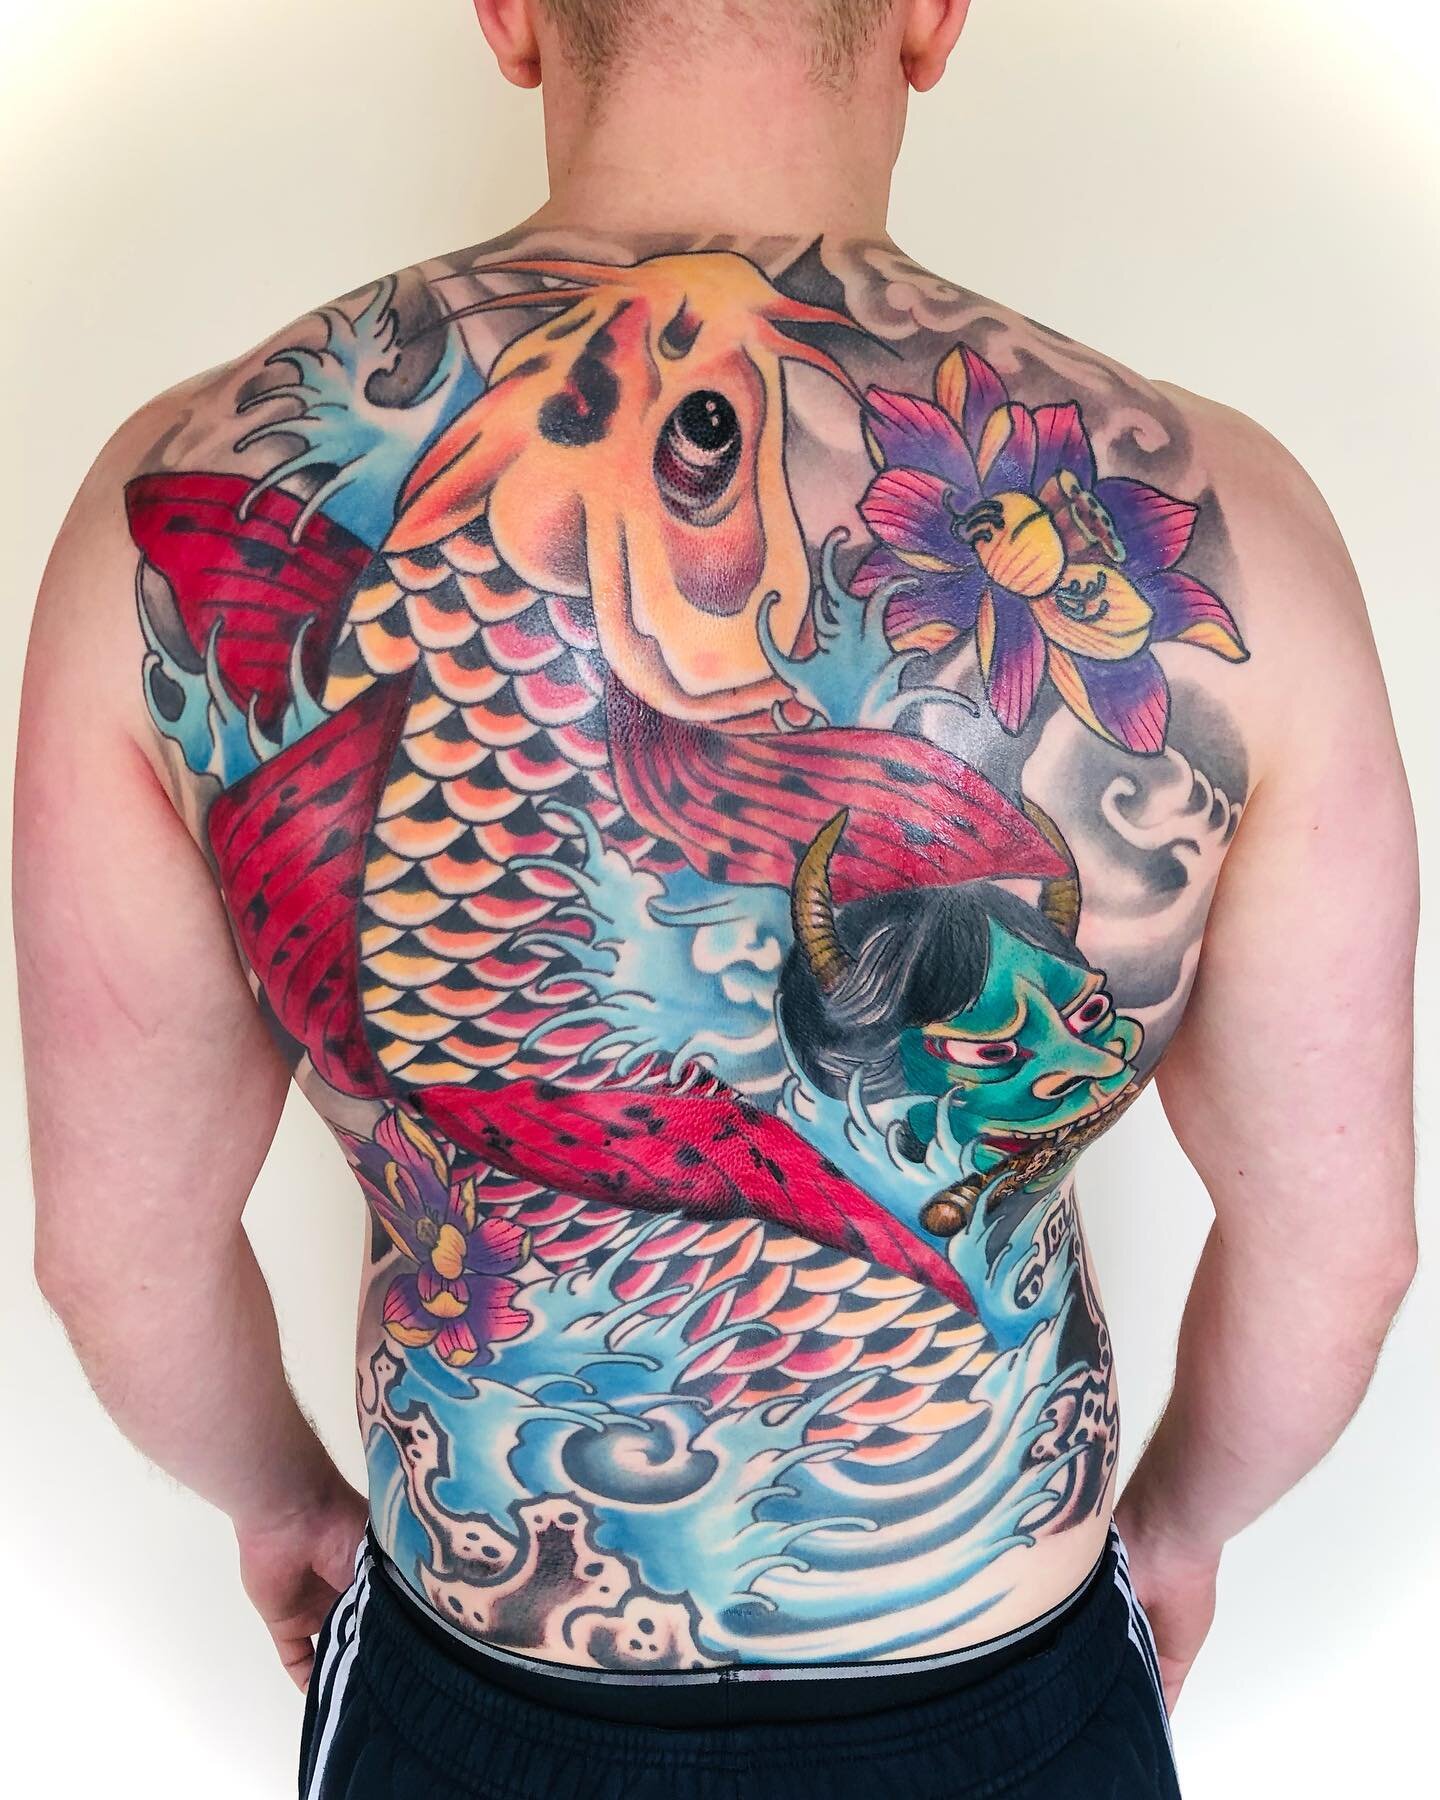 Finally got to finish this black piece on Glen after three years. Happy to see it finished , yet sad it&rsquo;s over.#japanesetattooing #koi #koitsttoo#japanesetattoo #72tattoo #manchestertattooist #manchester